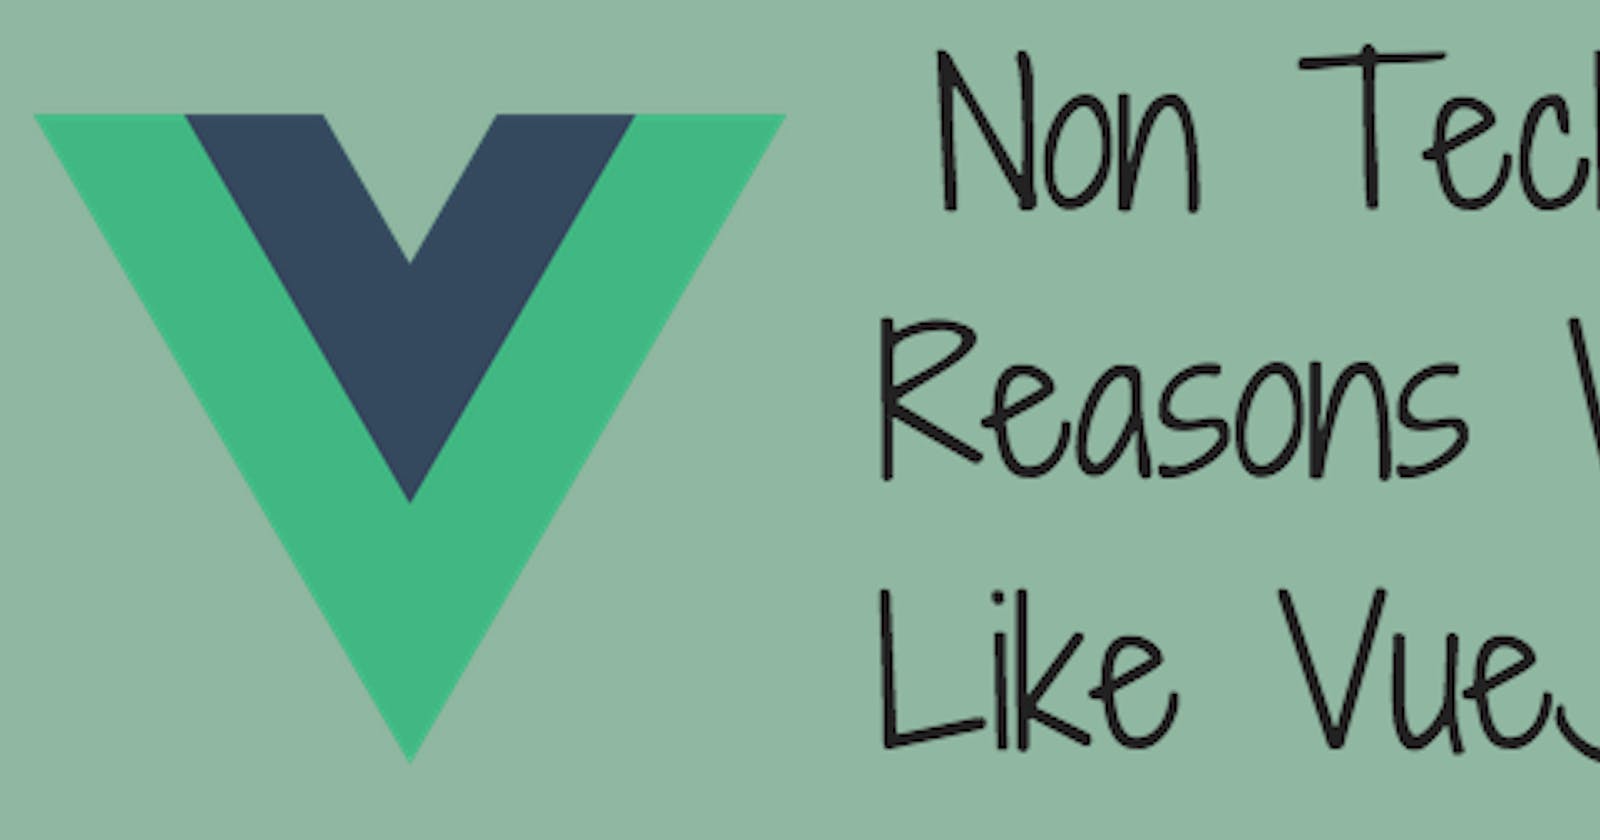 Non-technical reasons why I like Vue